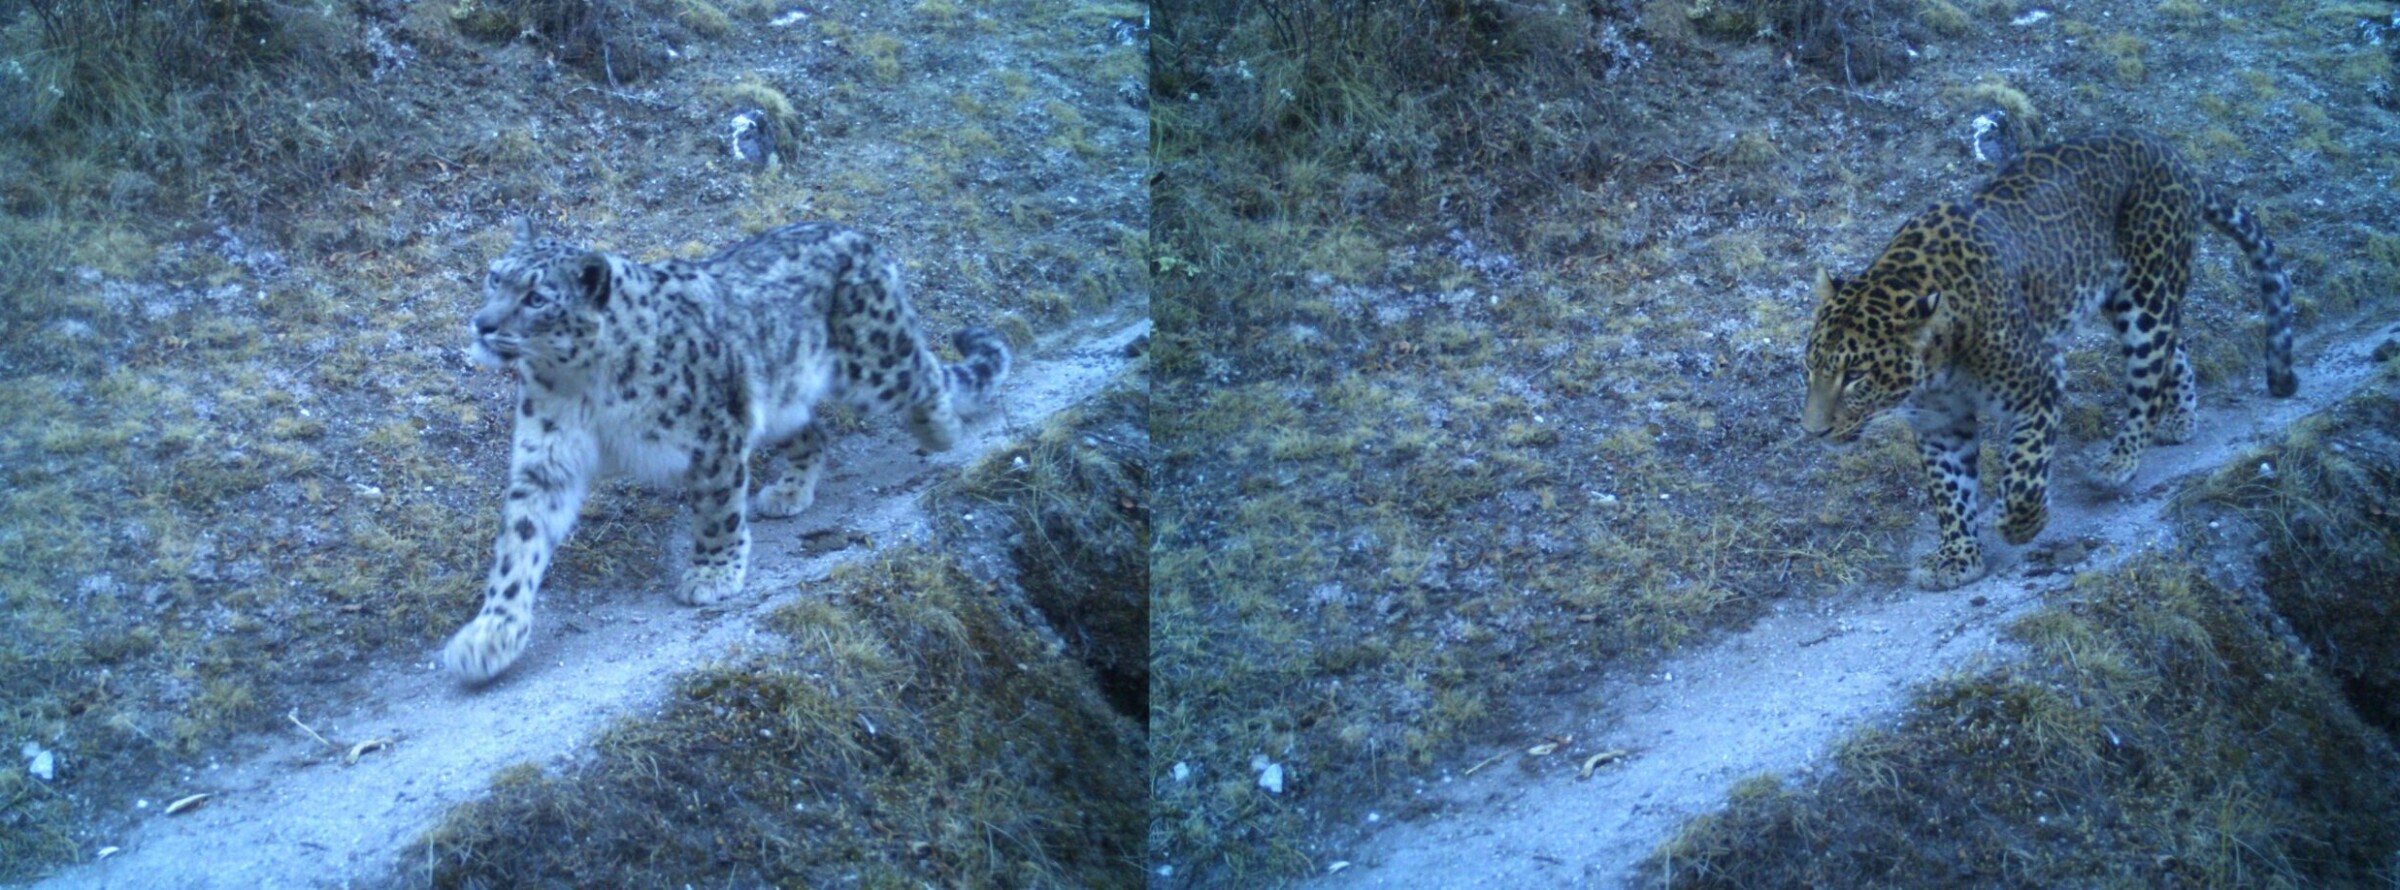 snow leopard and common leopard